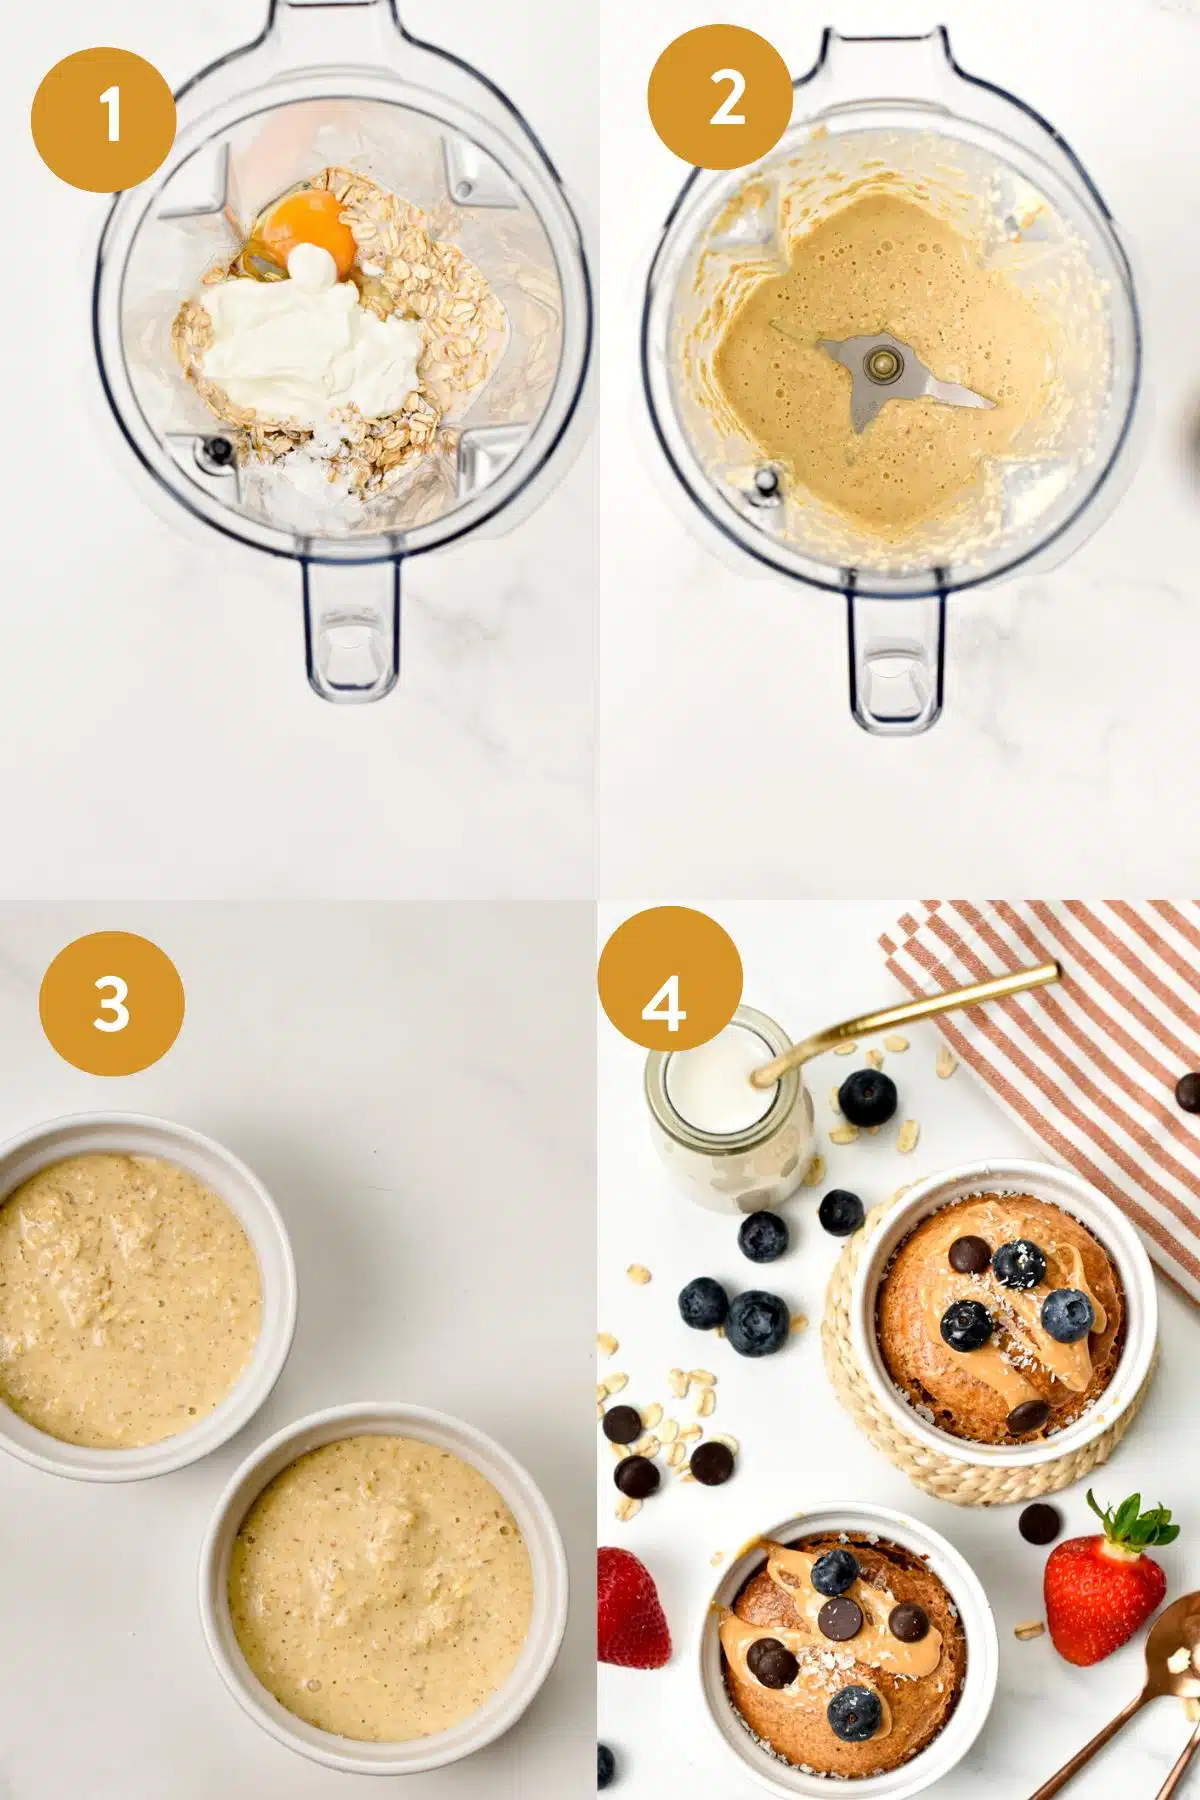 How to make Baked Oats without Bananas